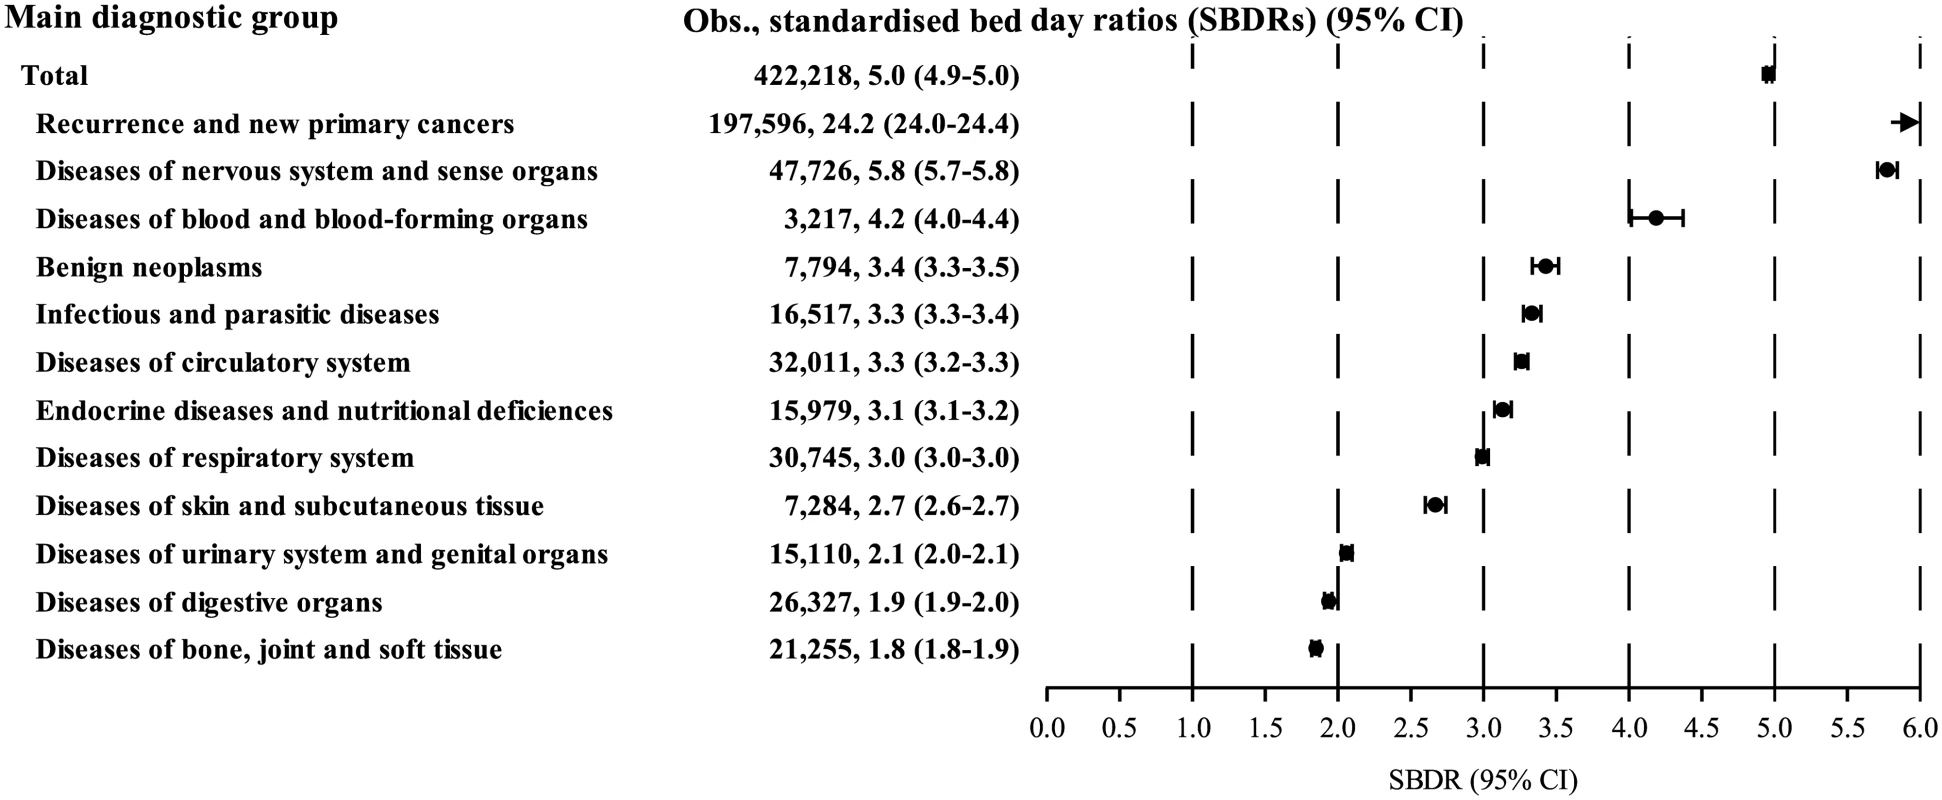 Number of bed days at hospital and associated standardised bed day ratios (SBDRs) for diseases in each of the 12 main diagnostic groups.